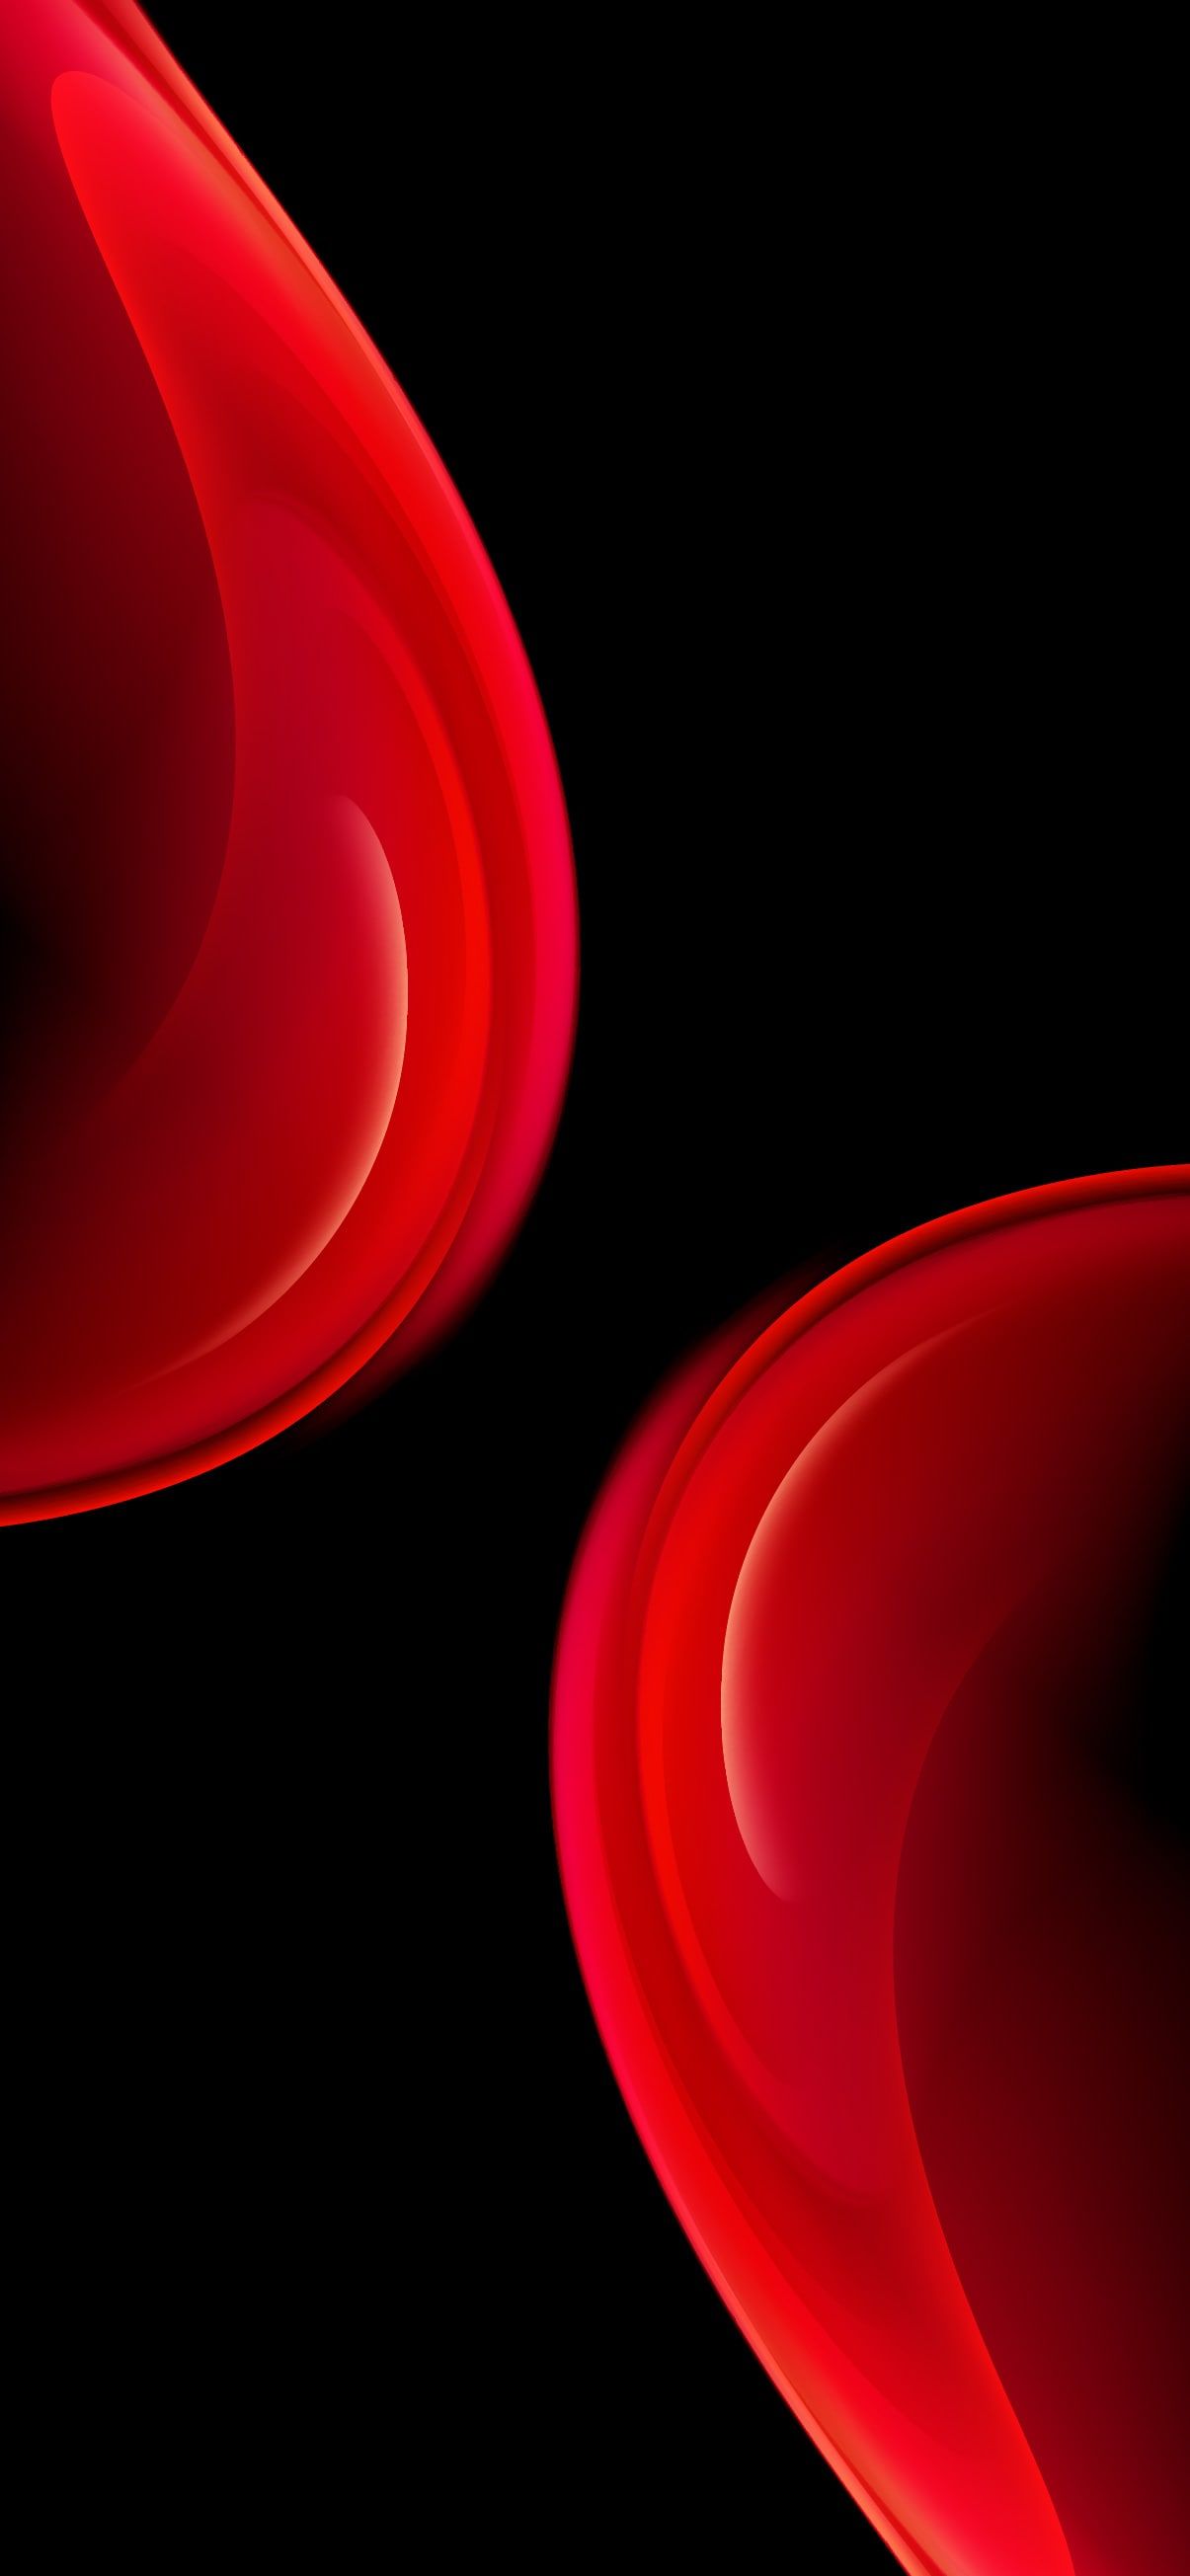 A close up of the red and black wallpaper on the iPhone 11 Pro. - IPhone red